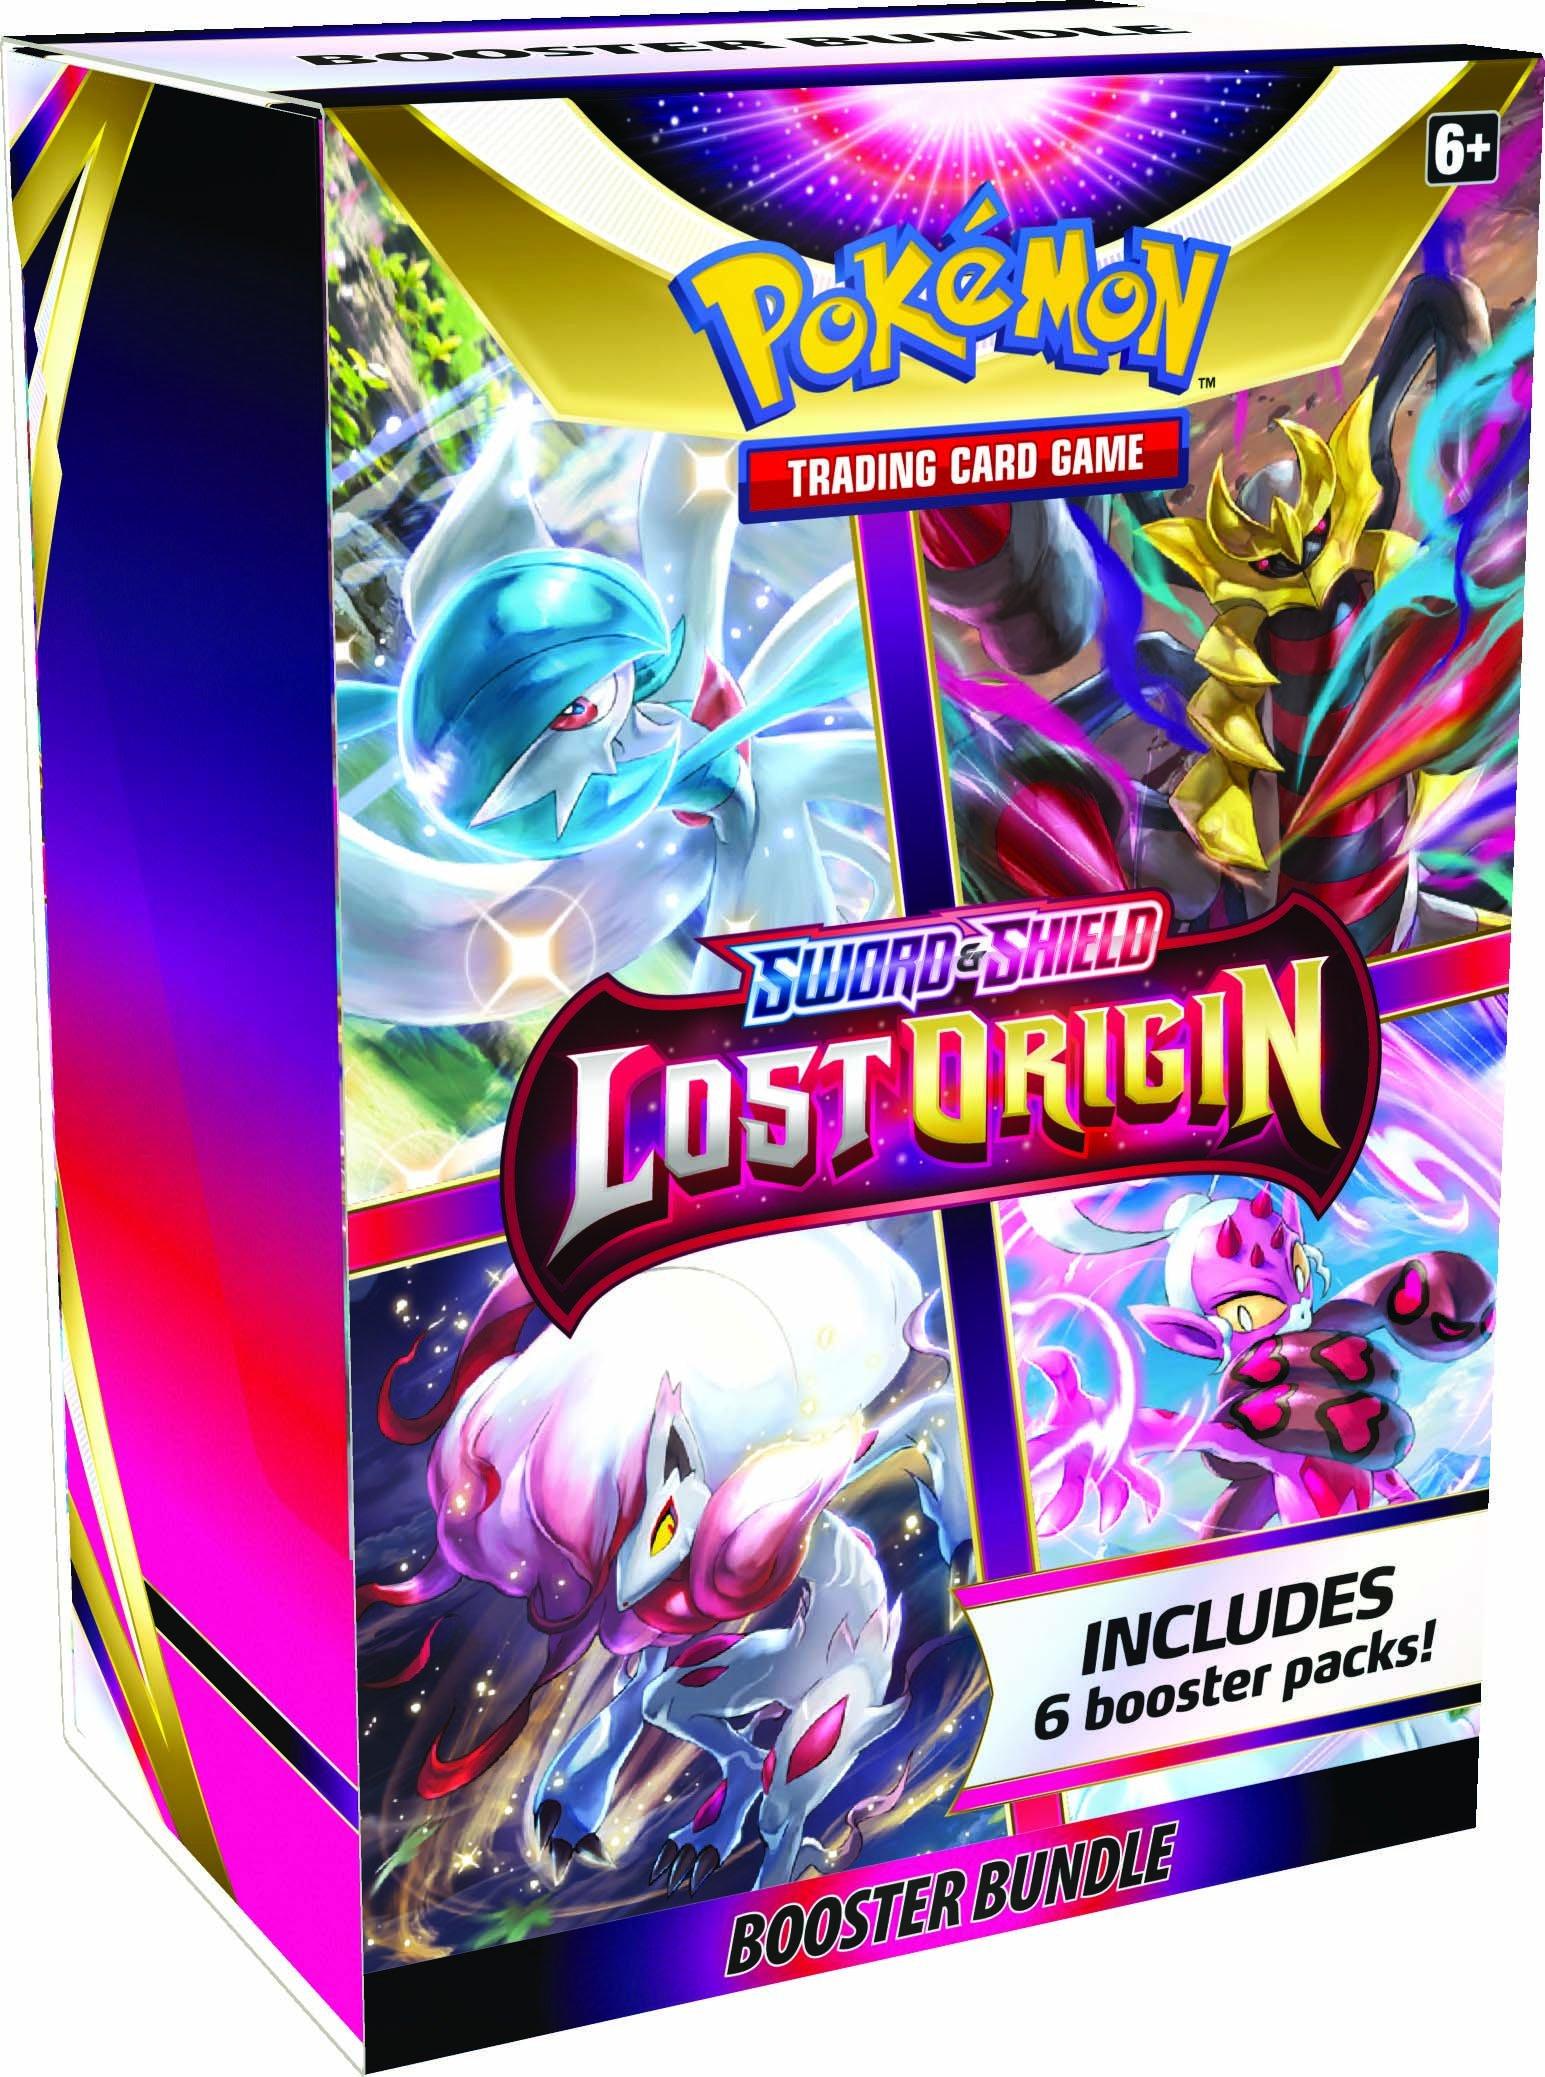 list item 2 of 3 Pokemon Trading Card Game: Sword and Shield - LOST ORIGIN Booster Bundle